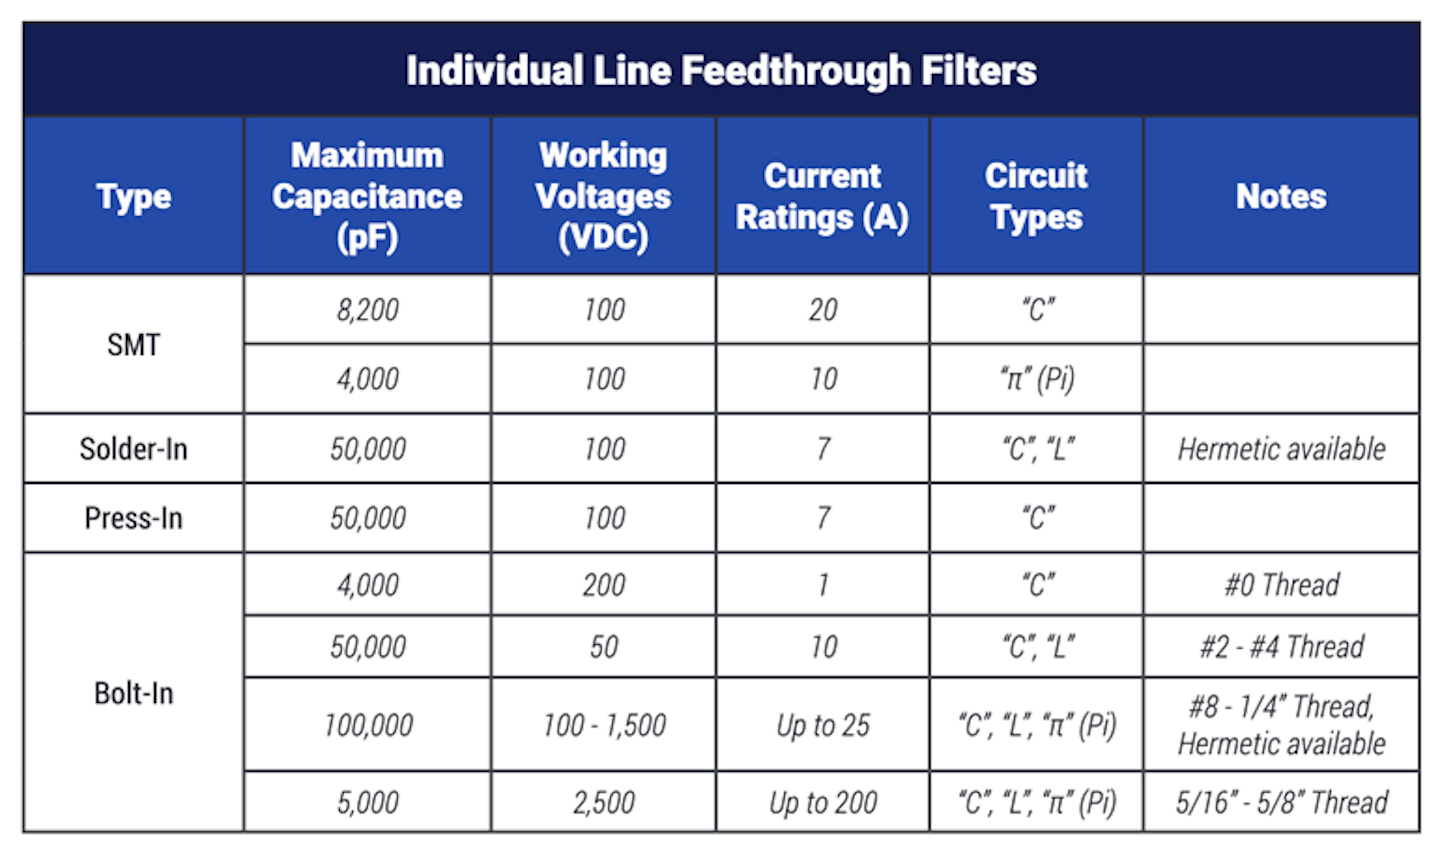 14. The maximum capacitance varies depending on the type of feedthrough filter you use.